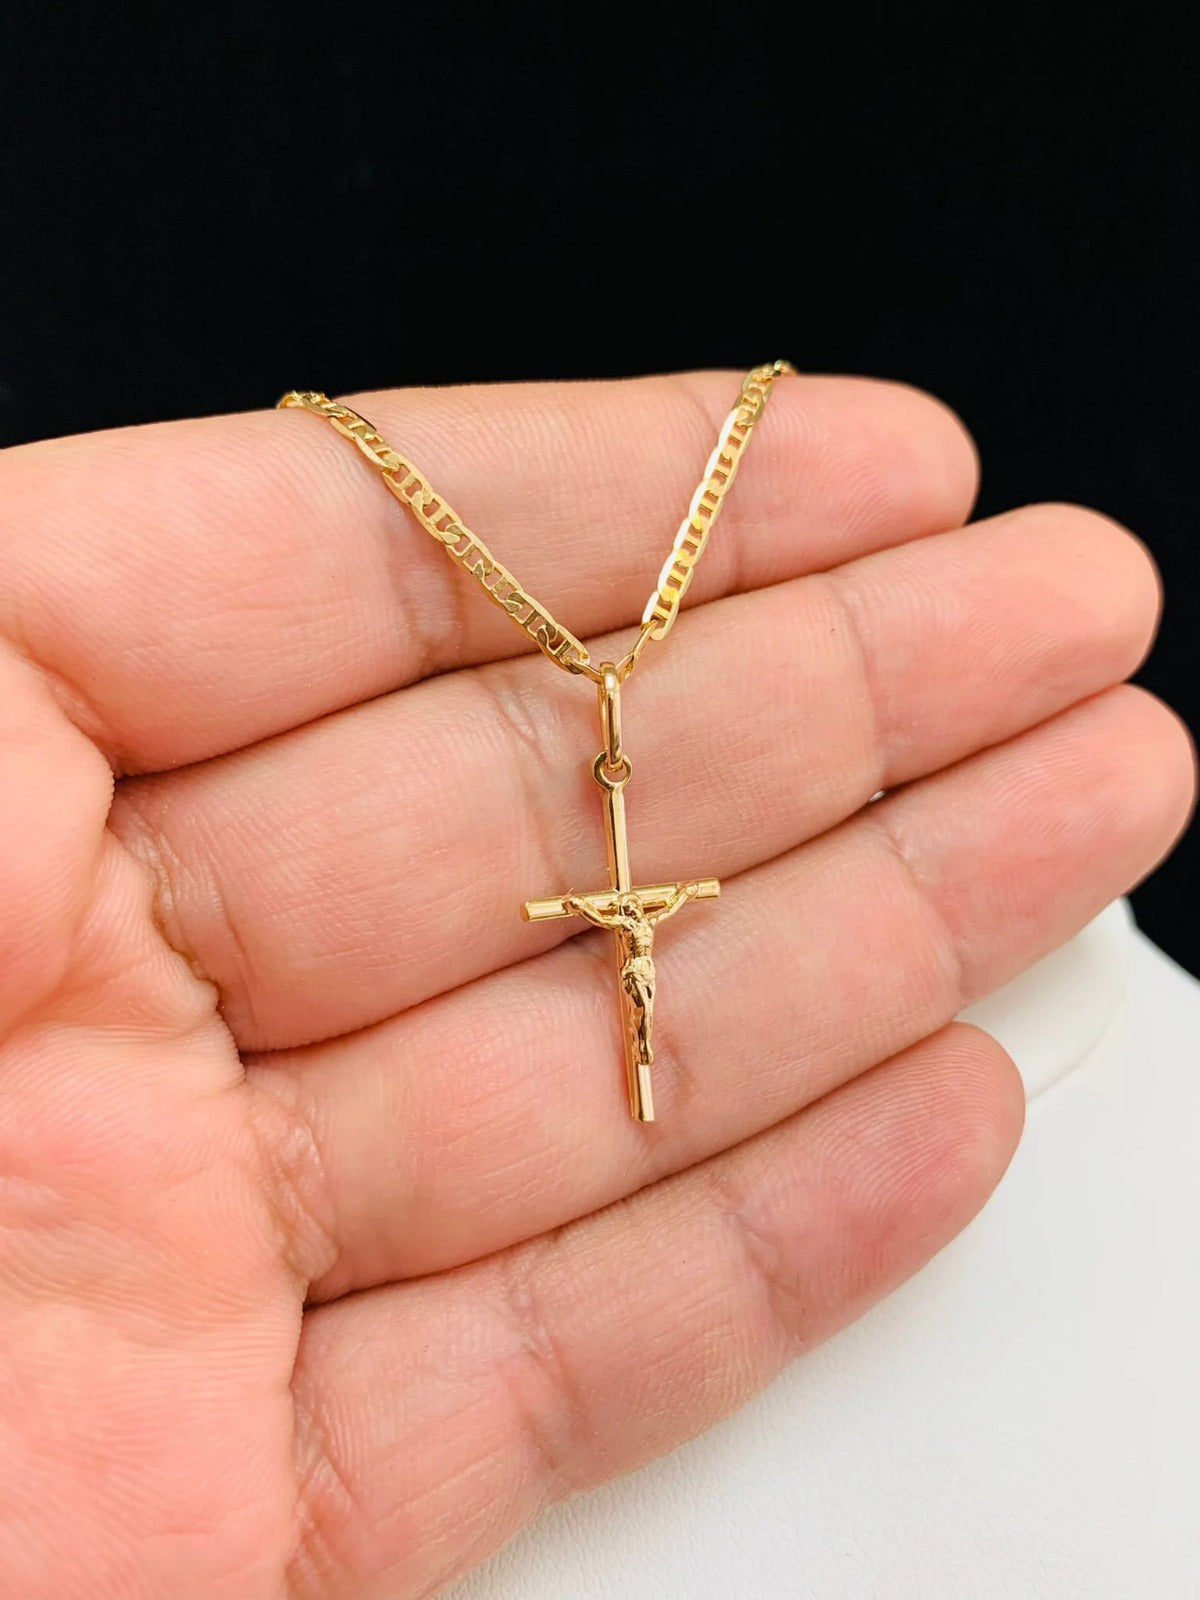 Buy Newborn Chain Kids Necklace in Gold Filled / Everyday Chain for Kids 14  / Kids Children Jewelry / Baby Chain Necklace / Cadena Para Ninos Online in  India - Etsy